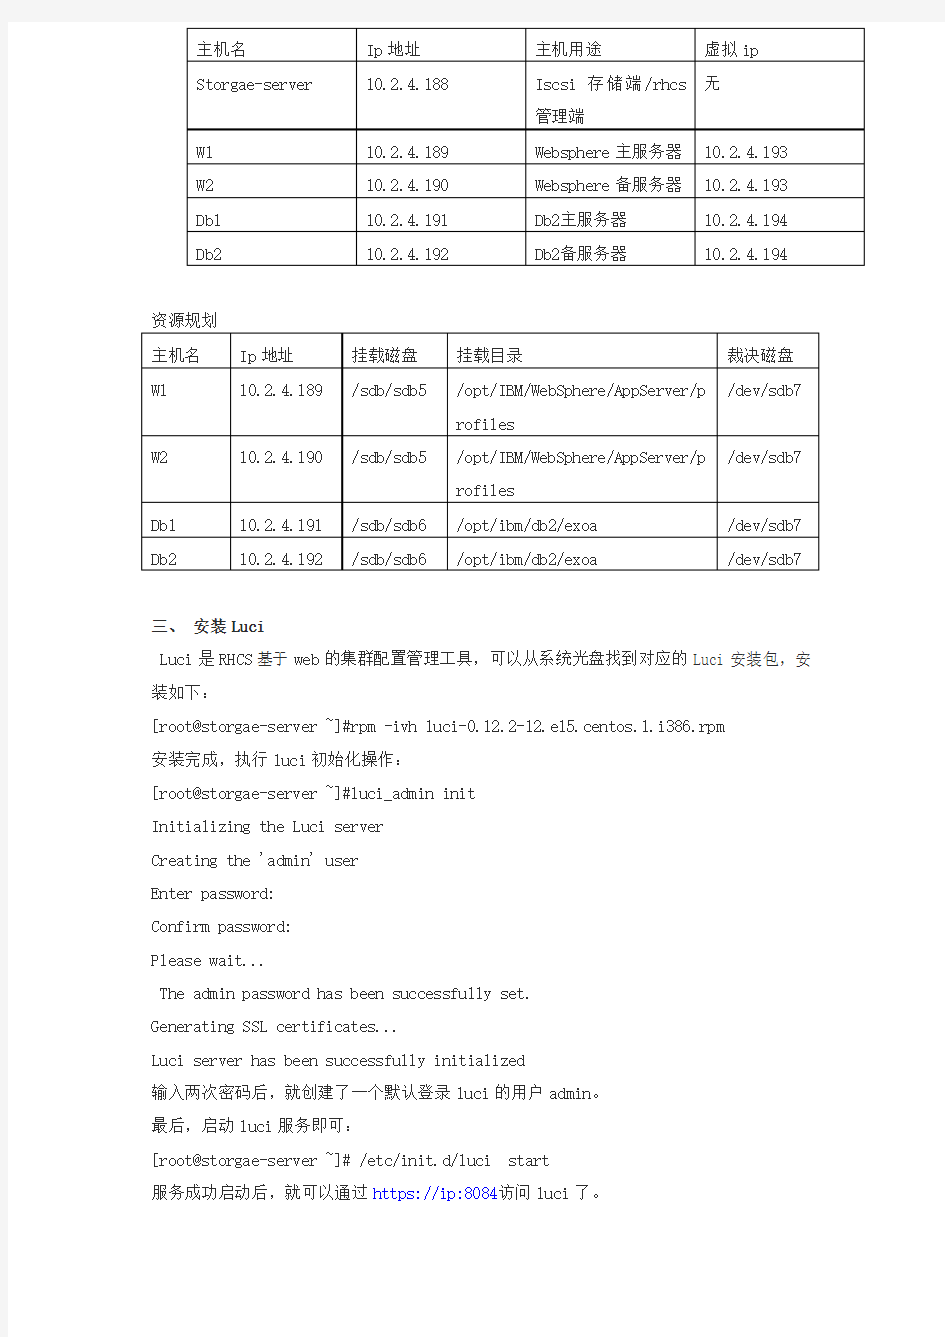 Rhcs集群部署文档